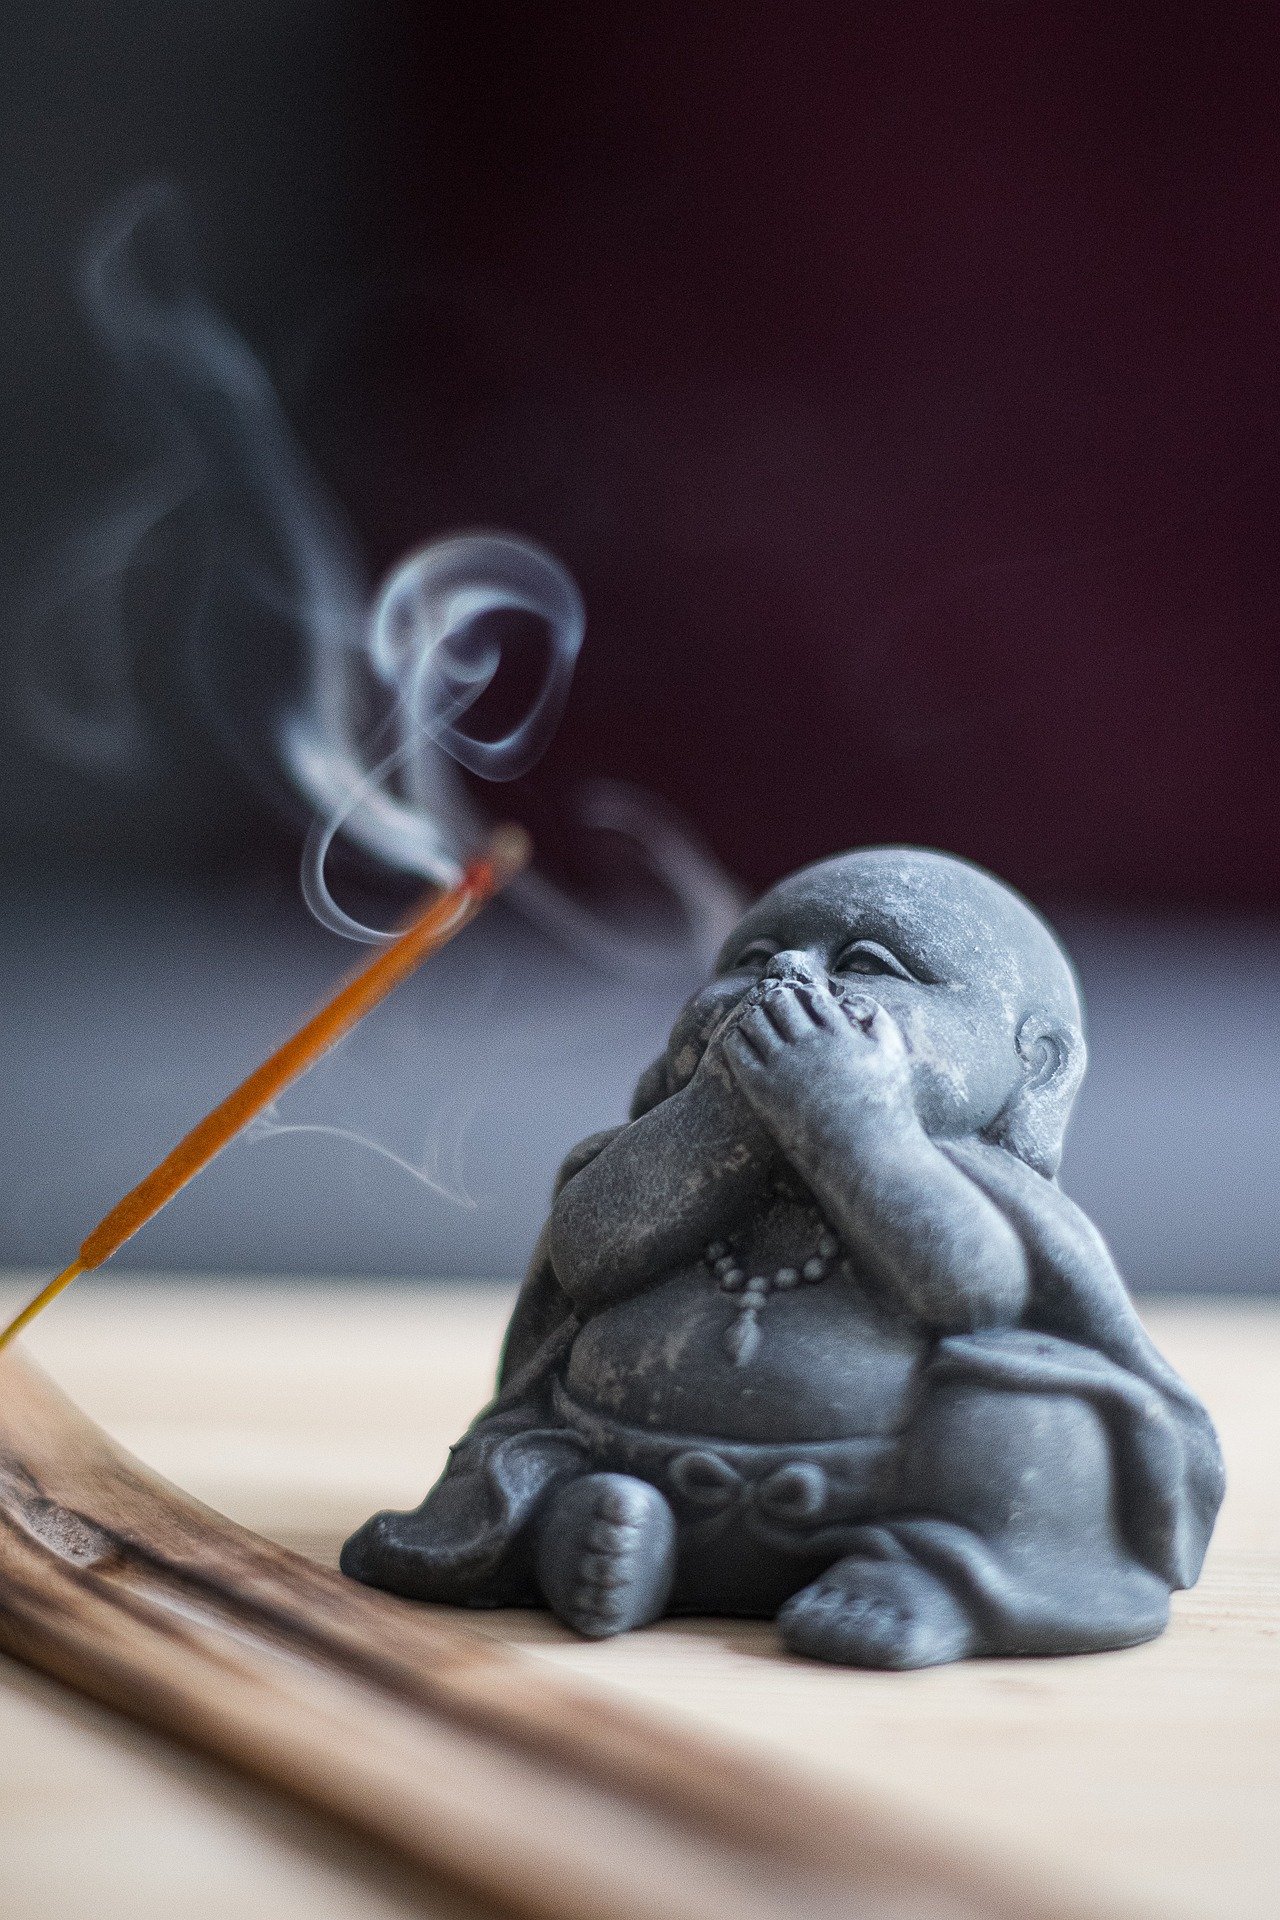 how to put out incense